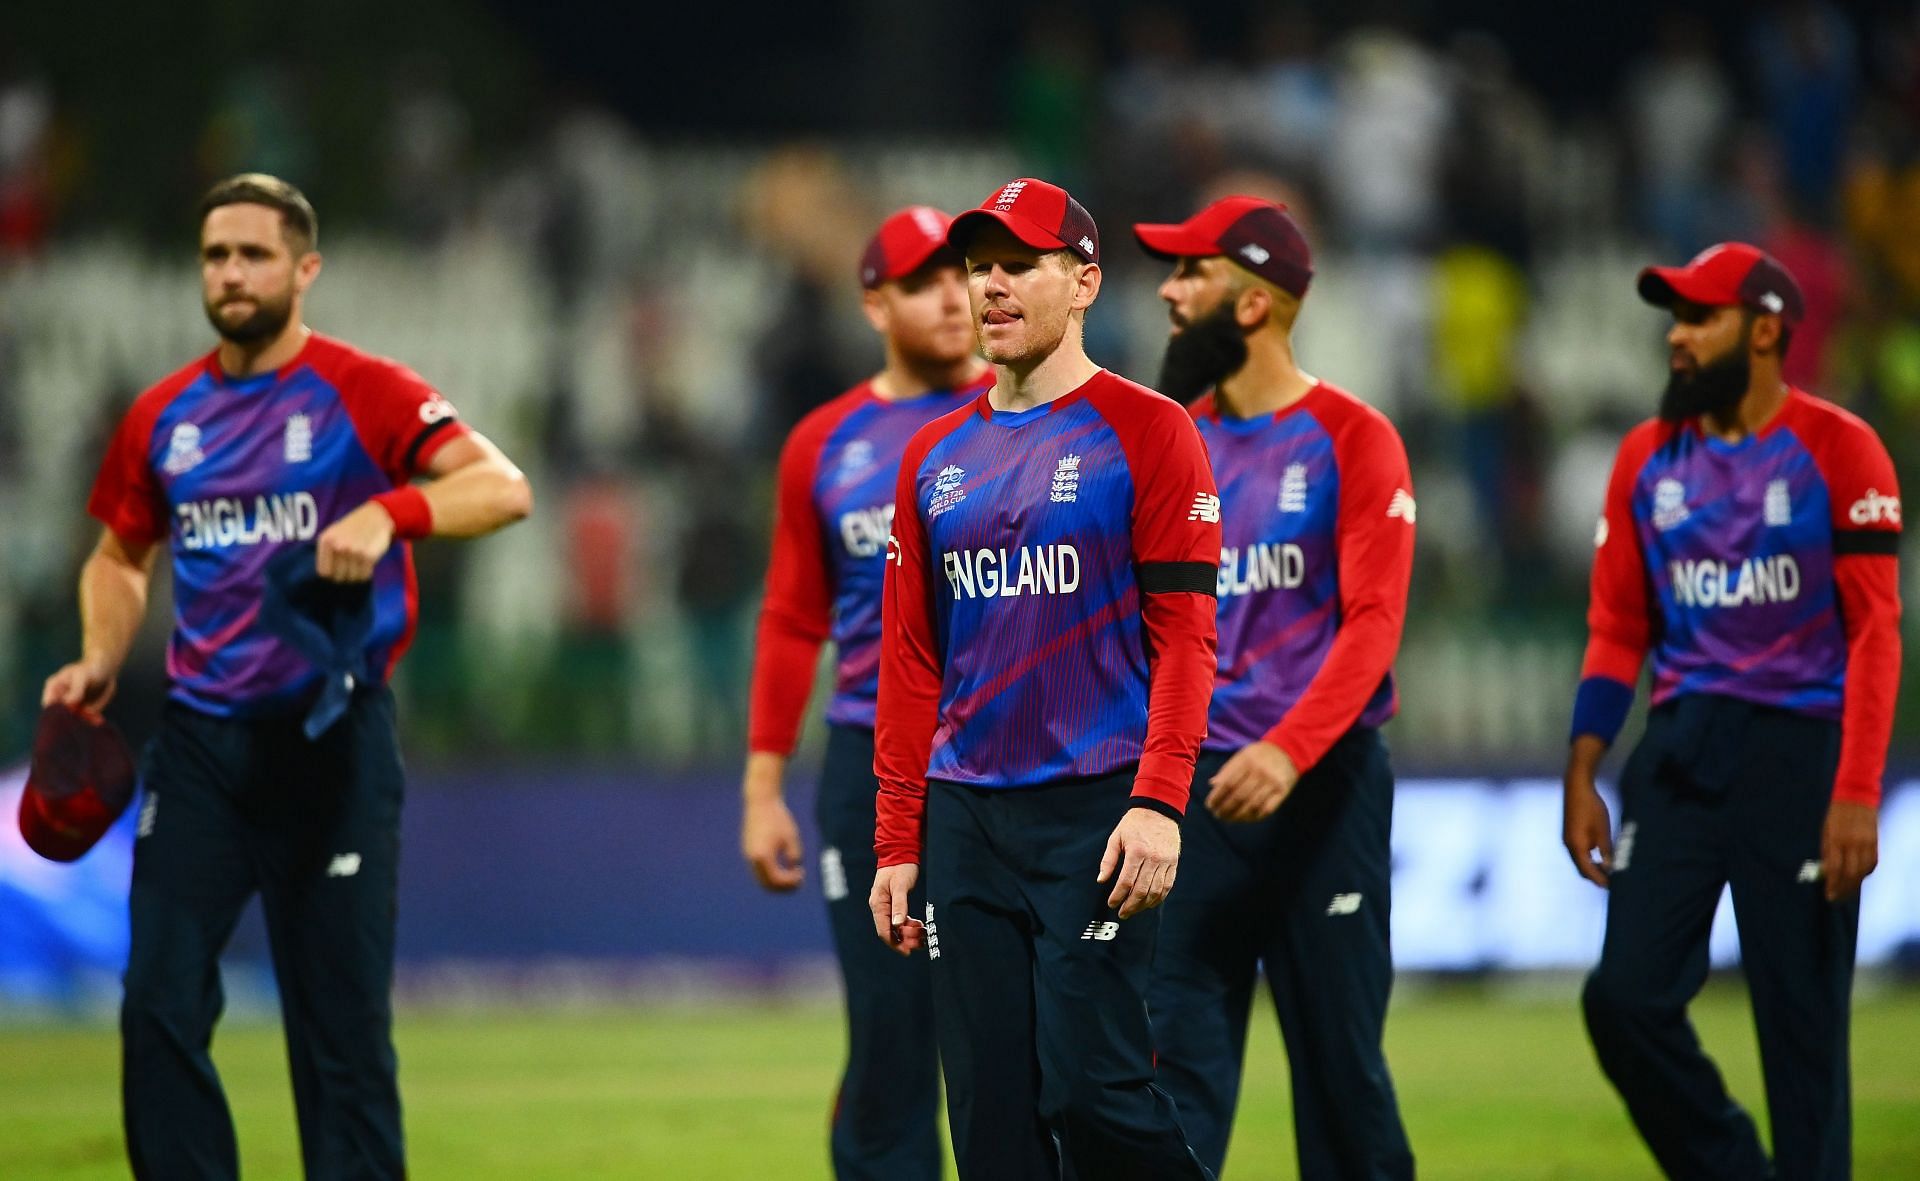 England were beaten by New Zealand in the semi-final of the T20 World Cup 2021.